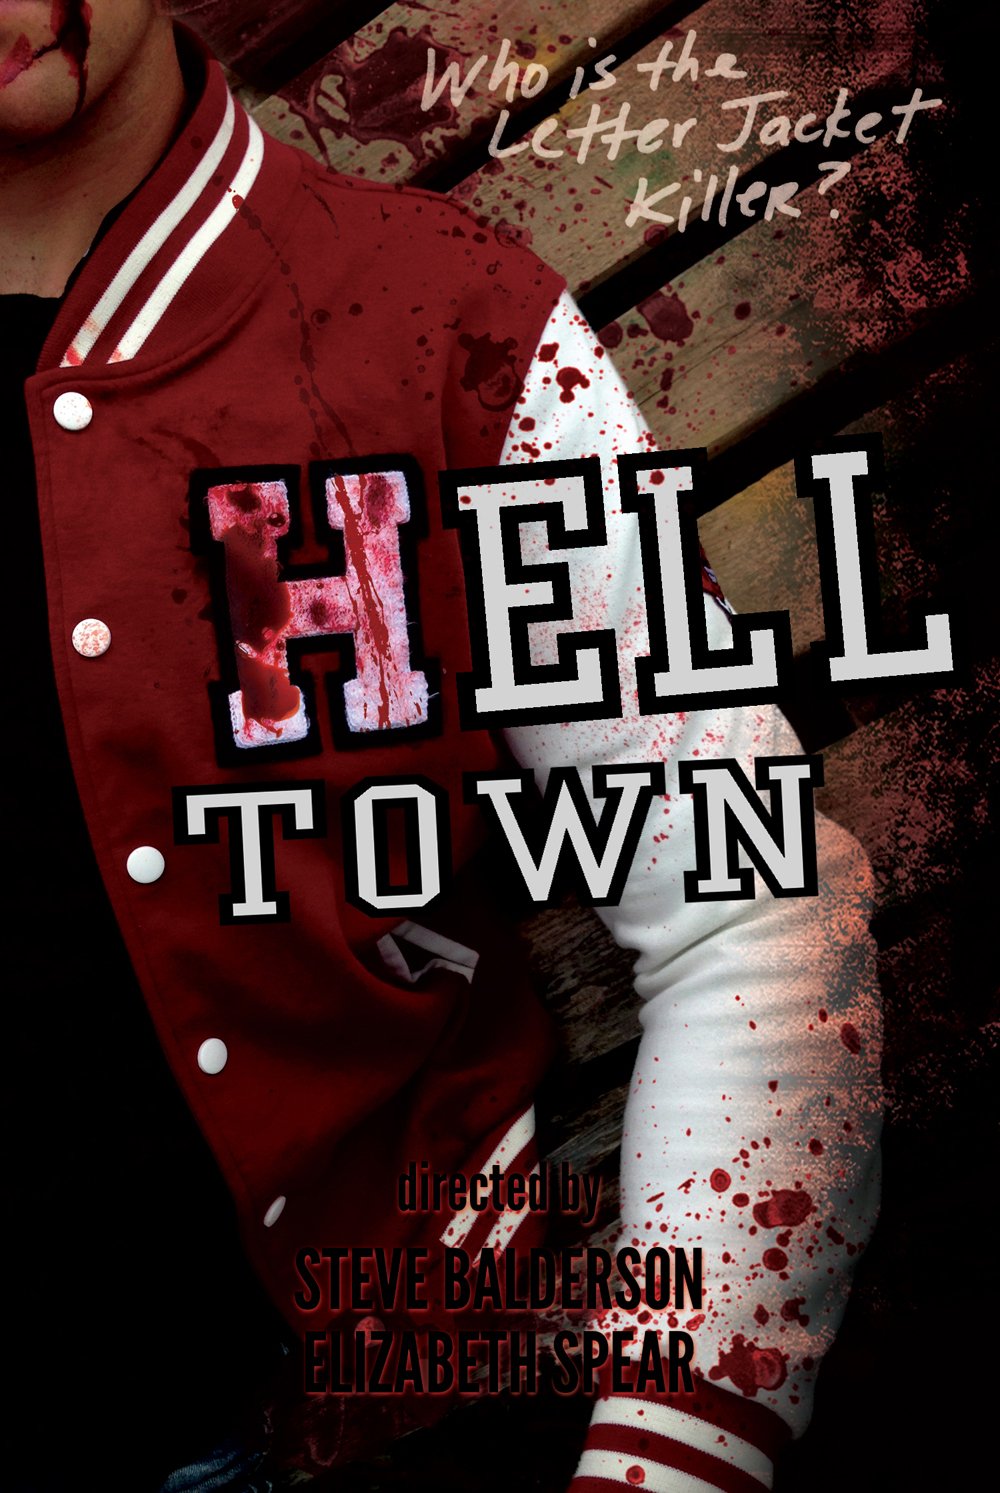 Poster of the movie Hell Town